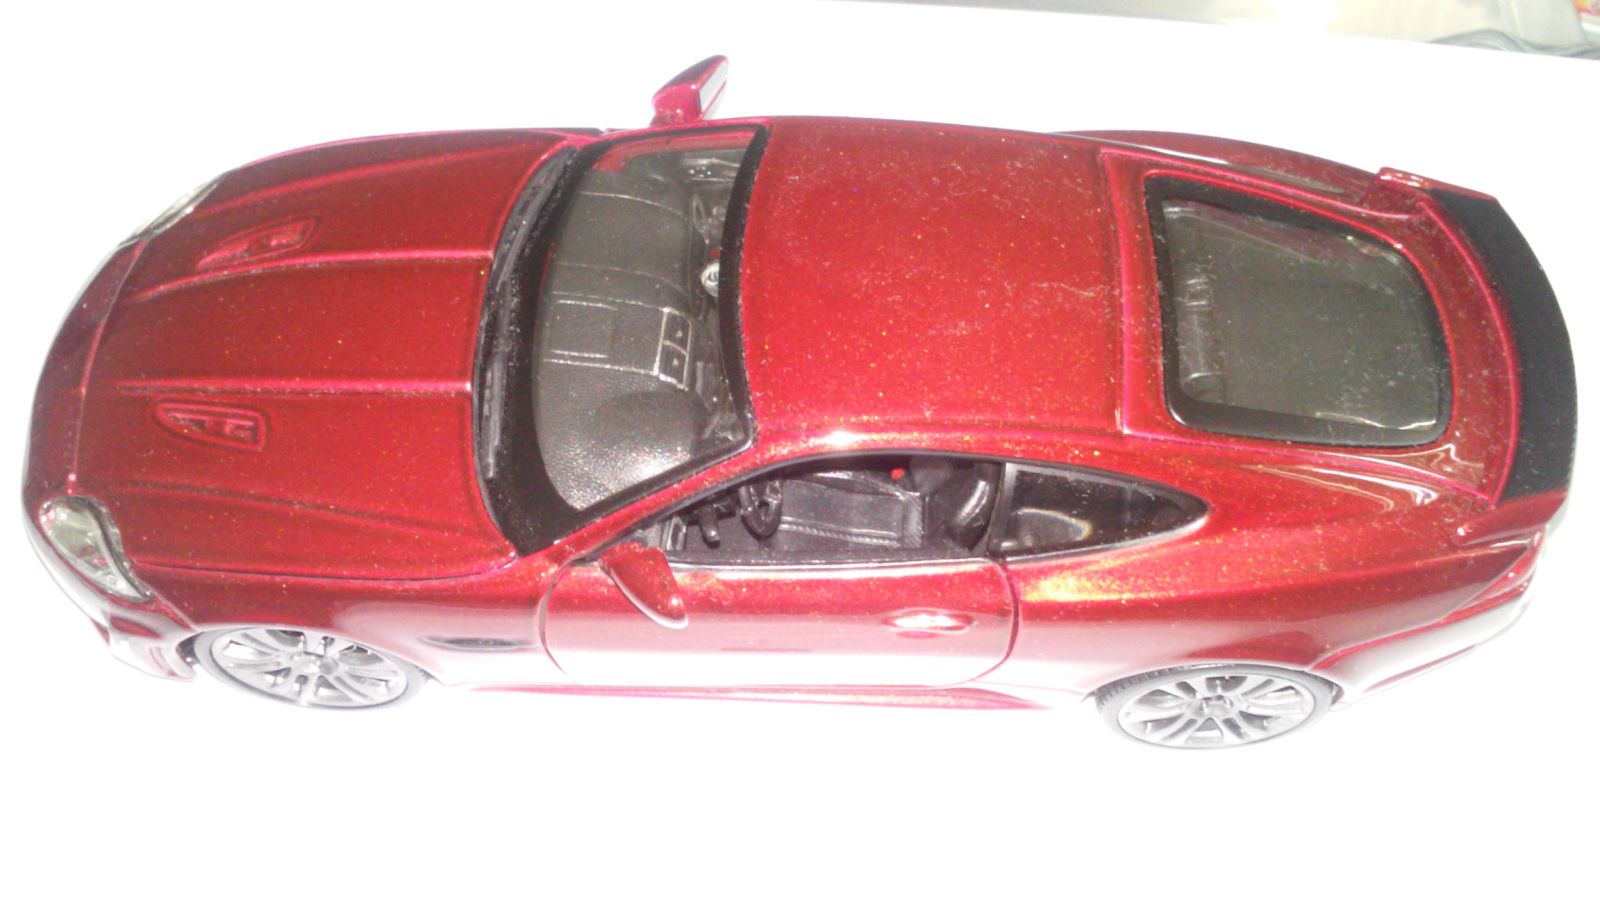 Illustration for article titled Bburago 1/24 Jaguar XKR-S+I might be interested getting into trading.